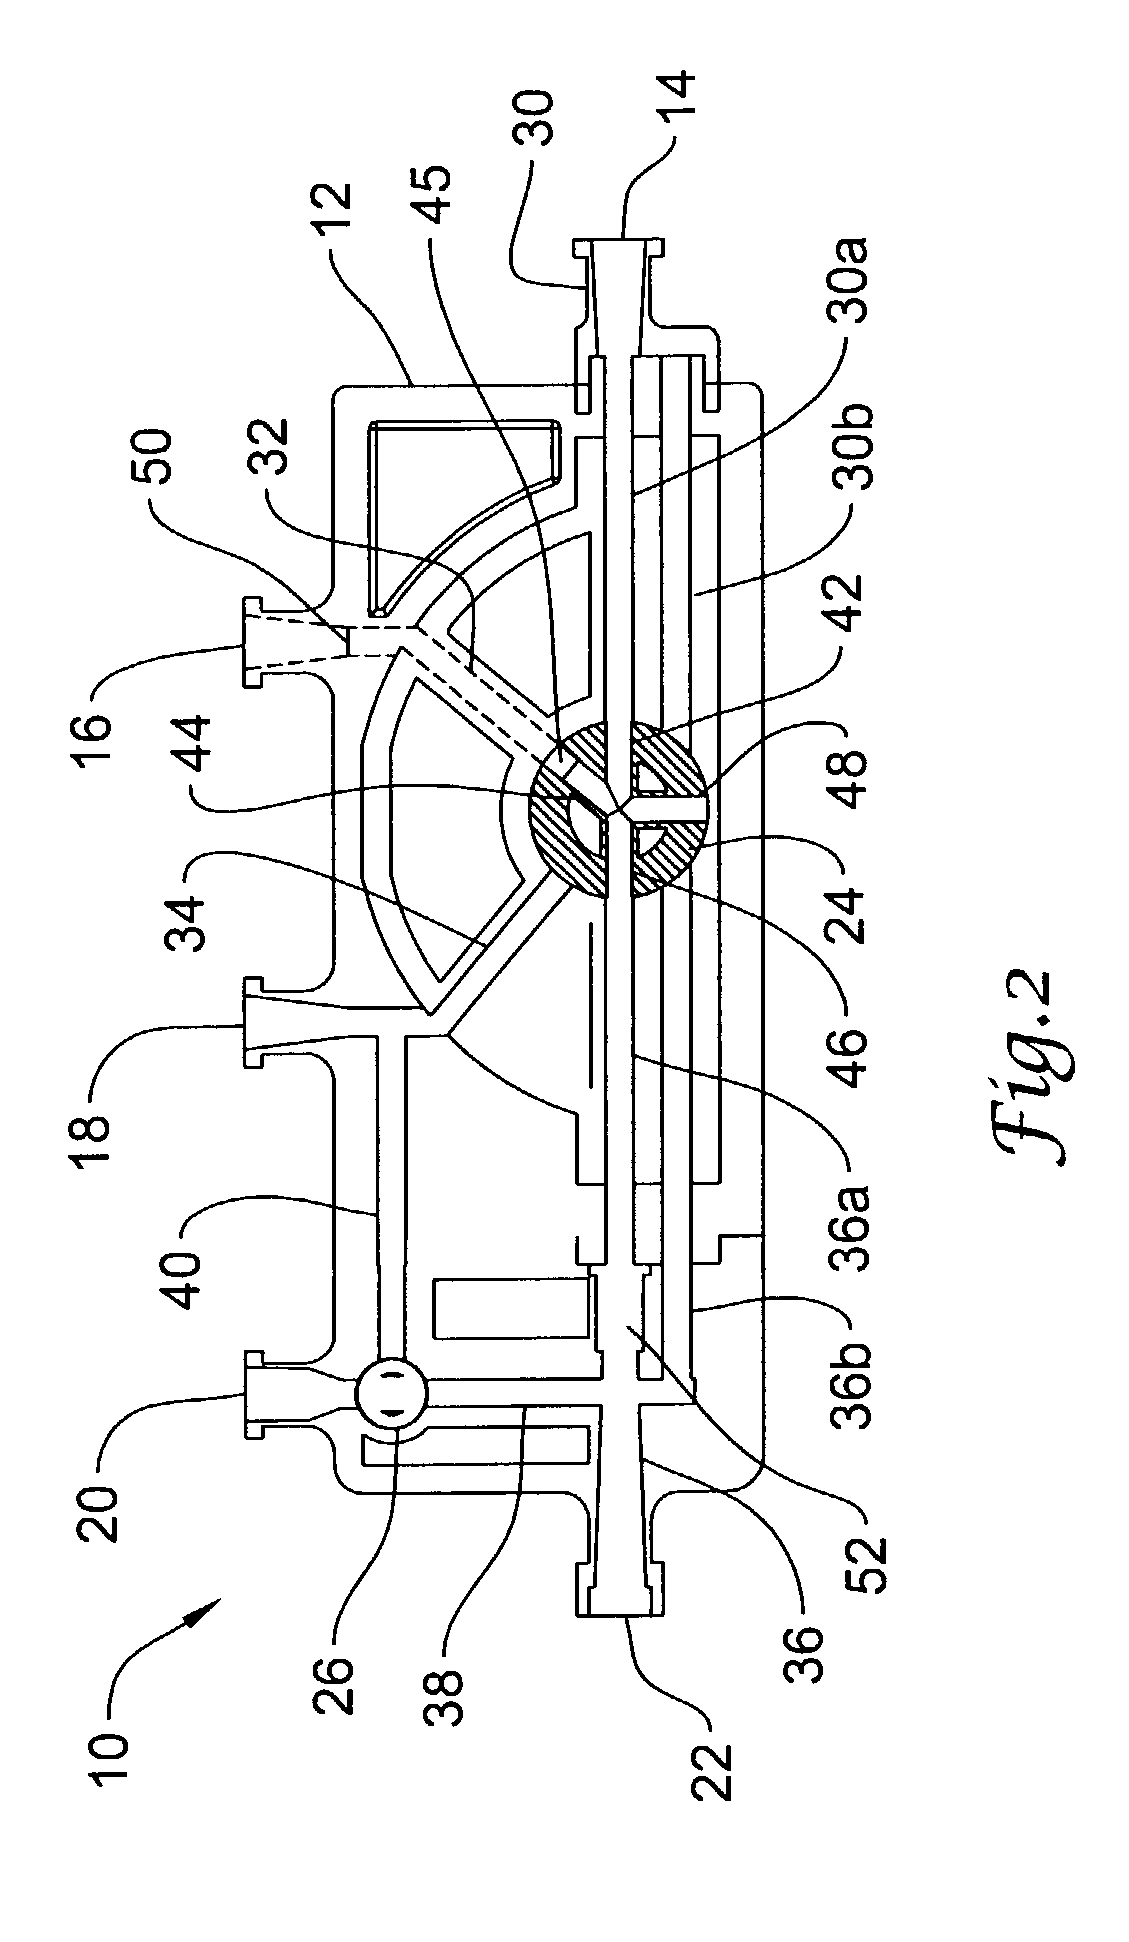 Manifold system for a medical device